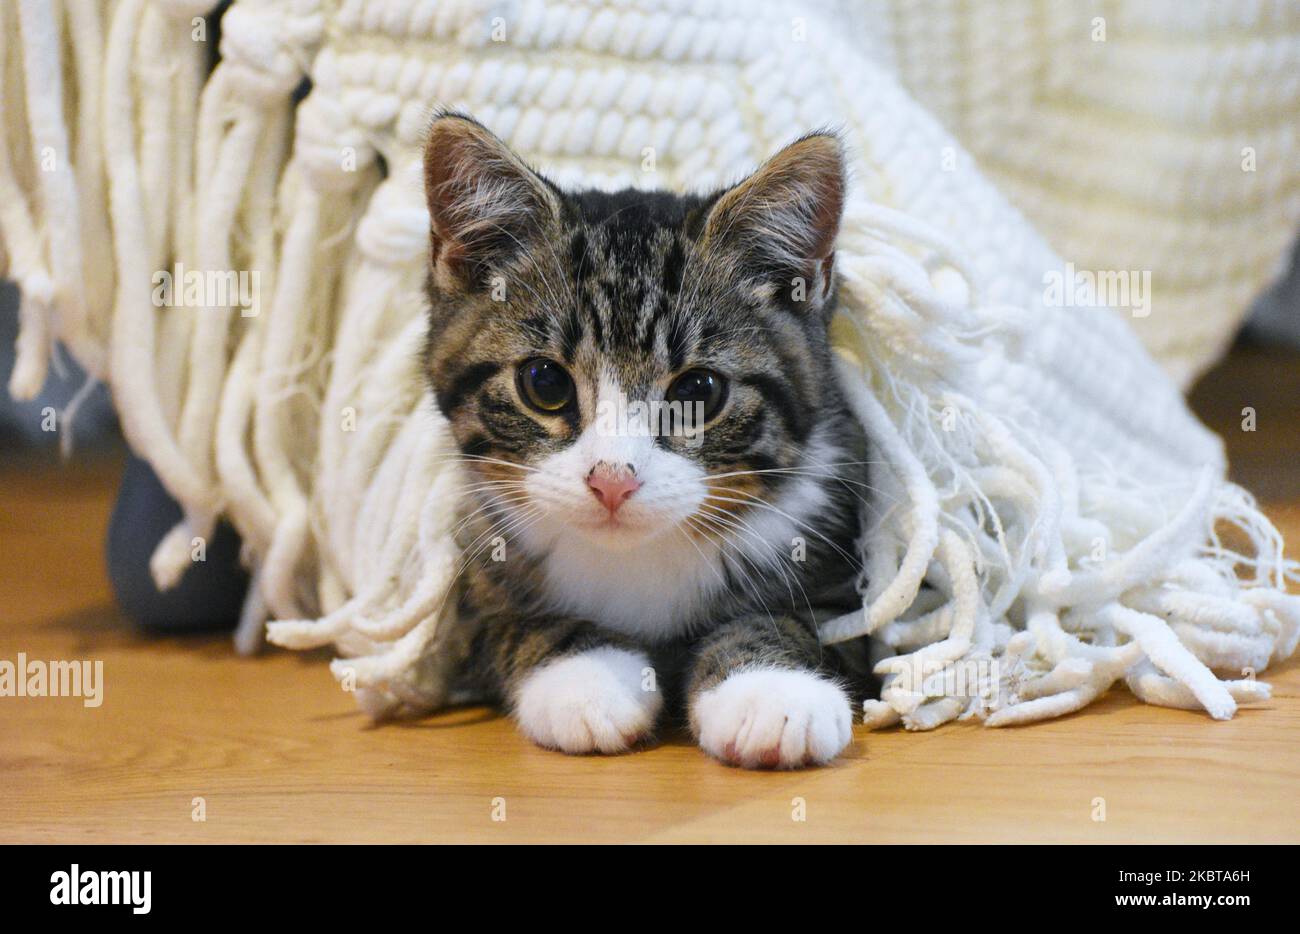 A cute tabby and white domestic shirt hair kitten aged approximately 10 weeks old Stock Photo